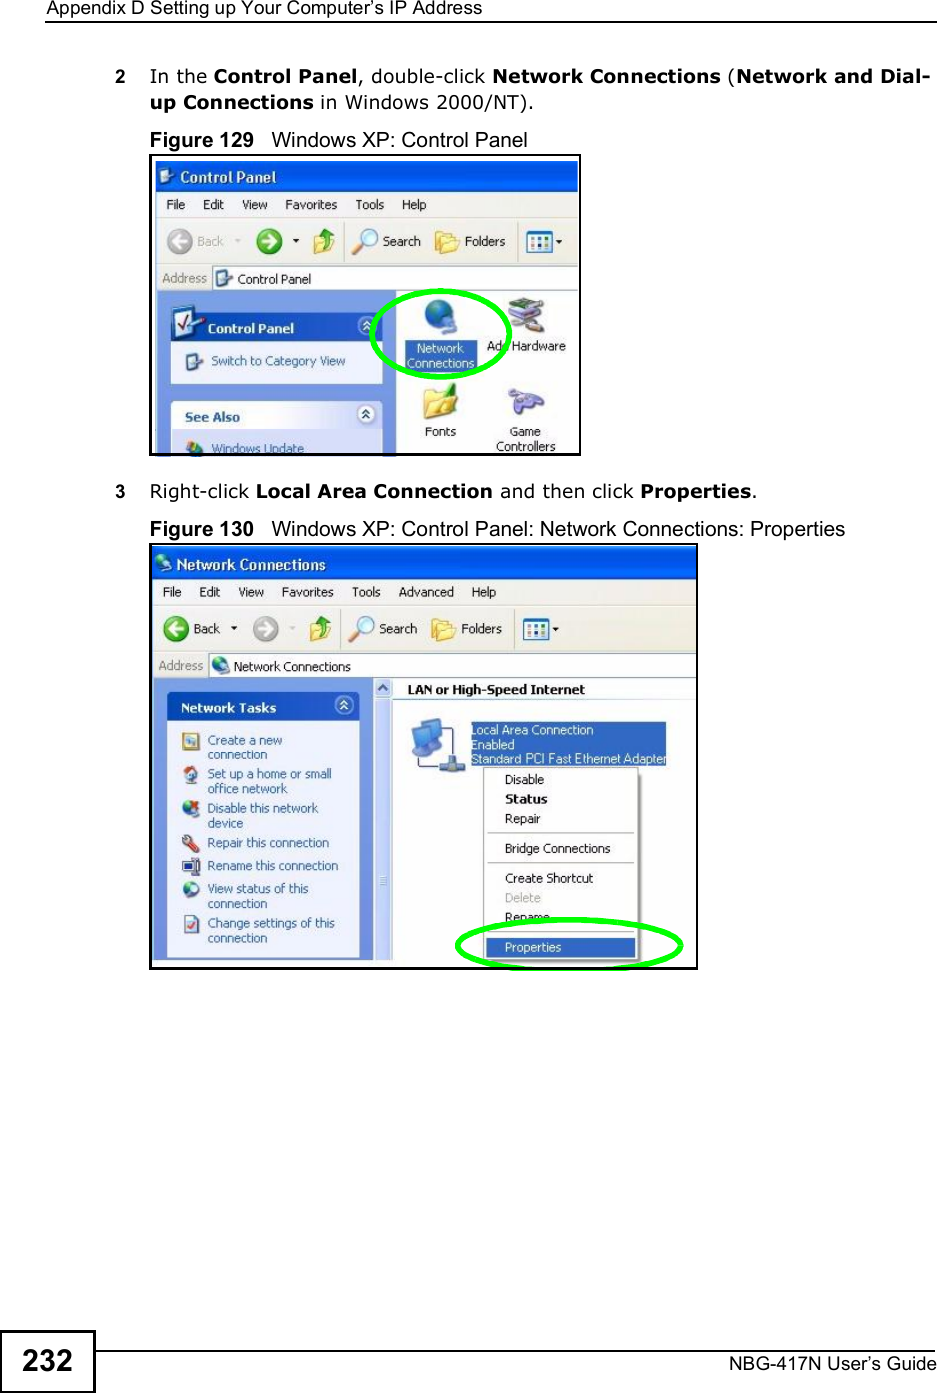 Appendix DSetting up Your Computer s IP AddressNBG-417N User s Guide2322In the Control Panel, double-click Network Connections (Network and Dial-up Connections in Windows 2000/NT).Figure 129   Windows XP: Control Panel3Right-click Local Area Connection and then click Properties.Figure 130   Windows XP: Control Panel: Network Connections: Properties